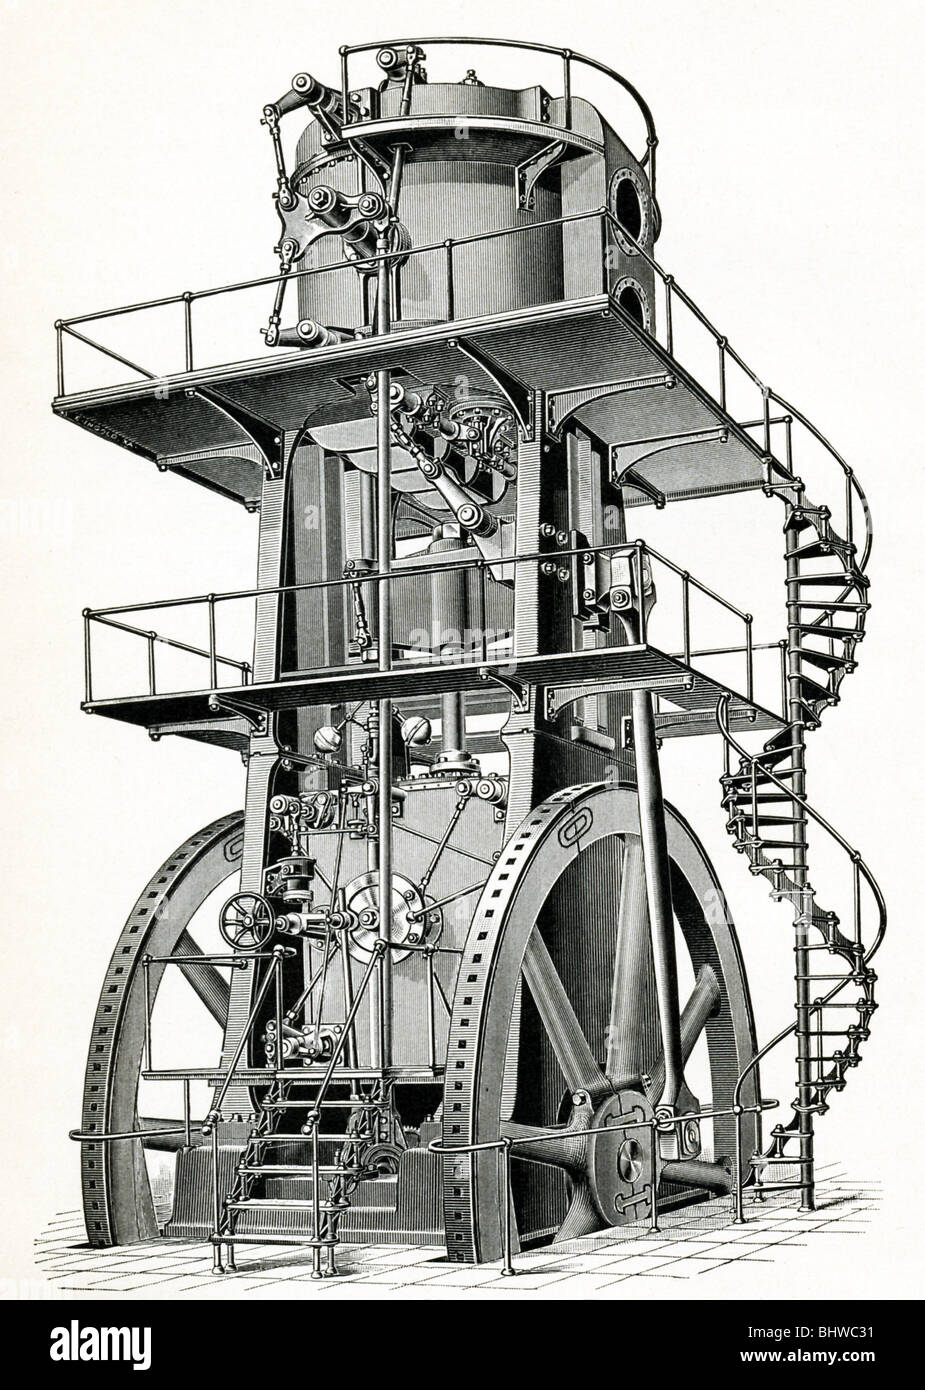 This vertical blowing machine  was the type of engine used to furnish the blast for smelting ores in the late 1800s. Stock Photo